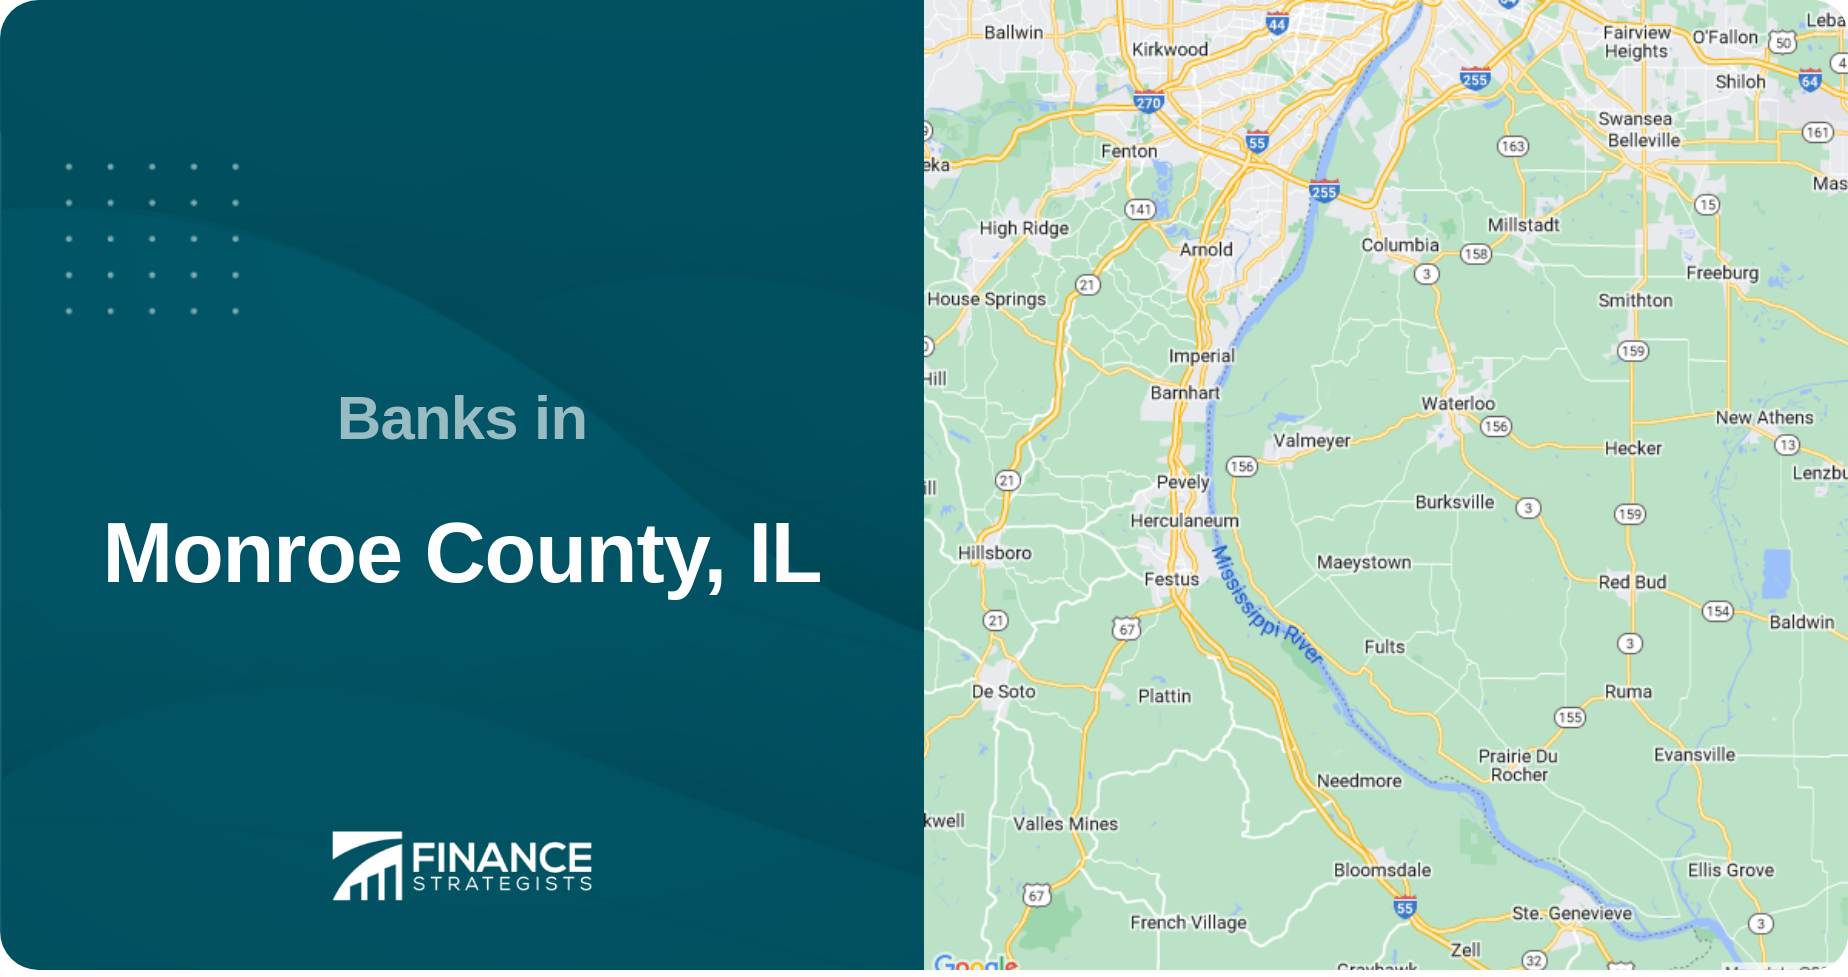 Banks in Monroe County, IL